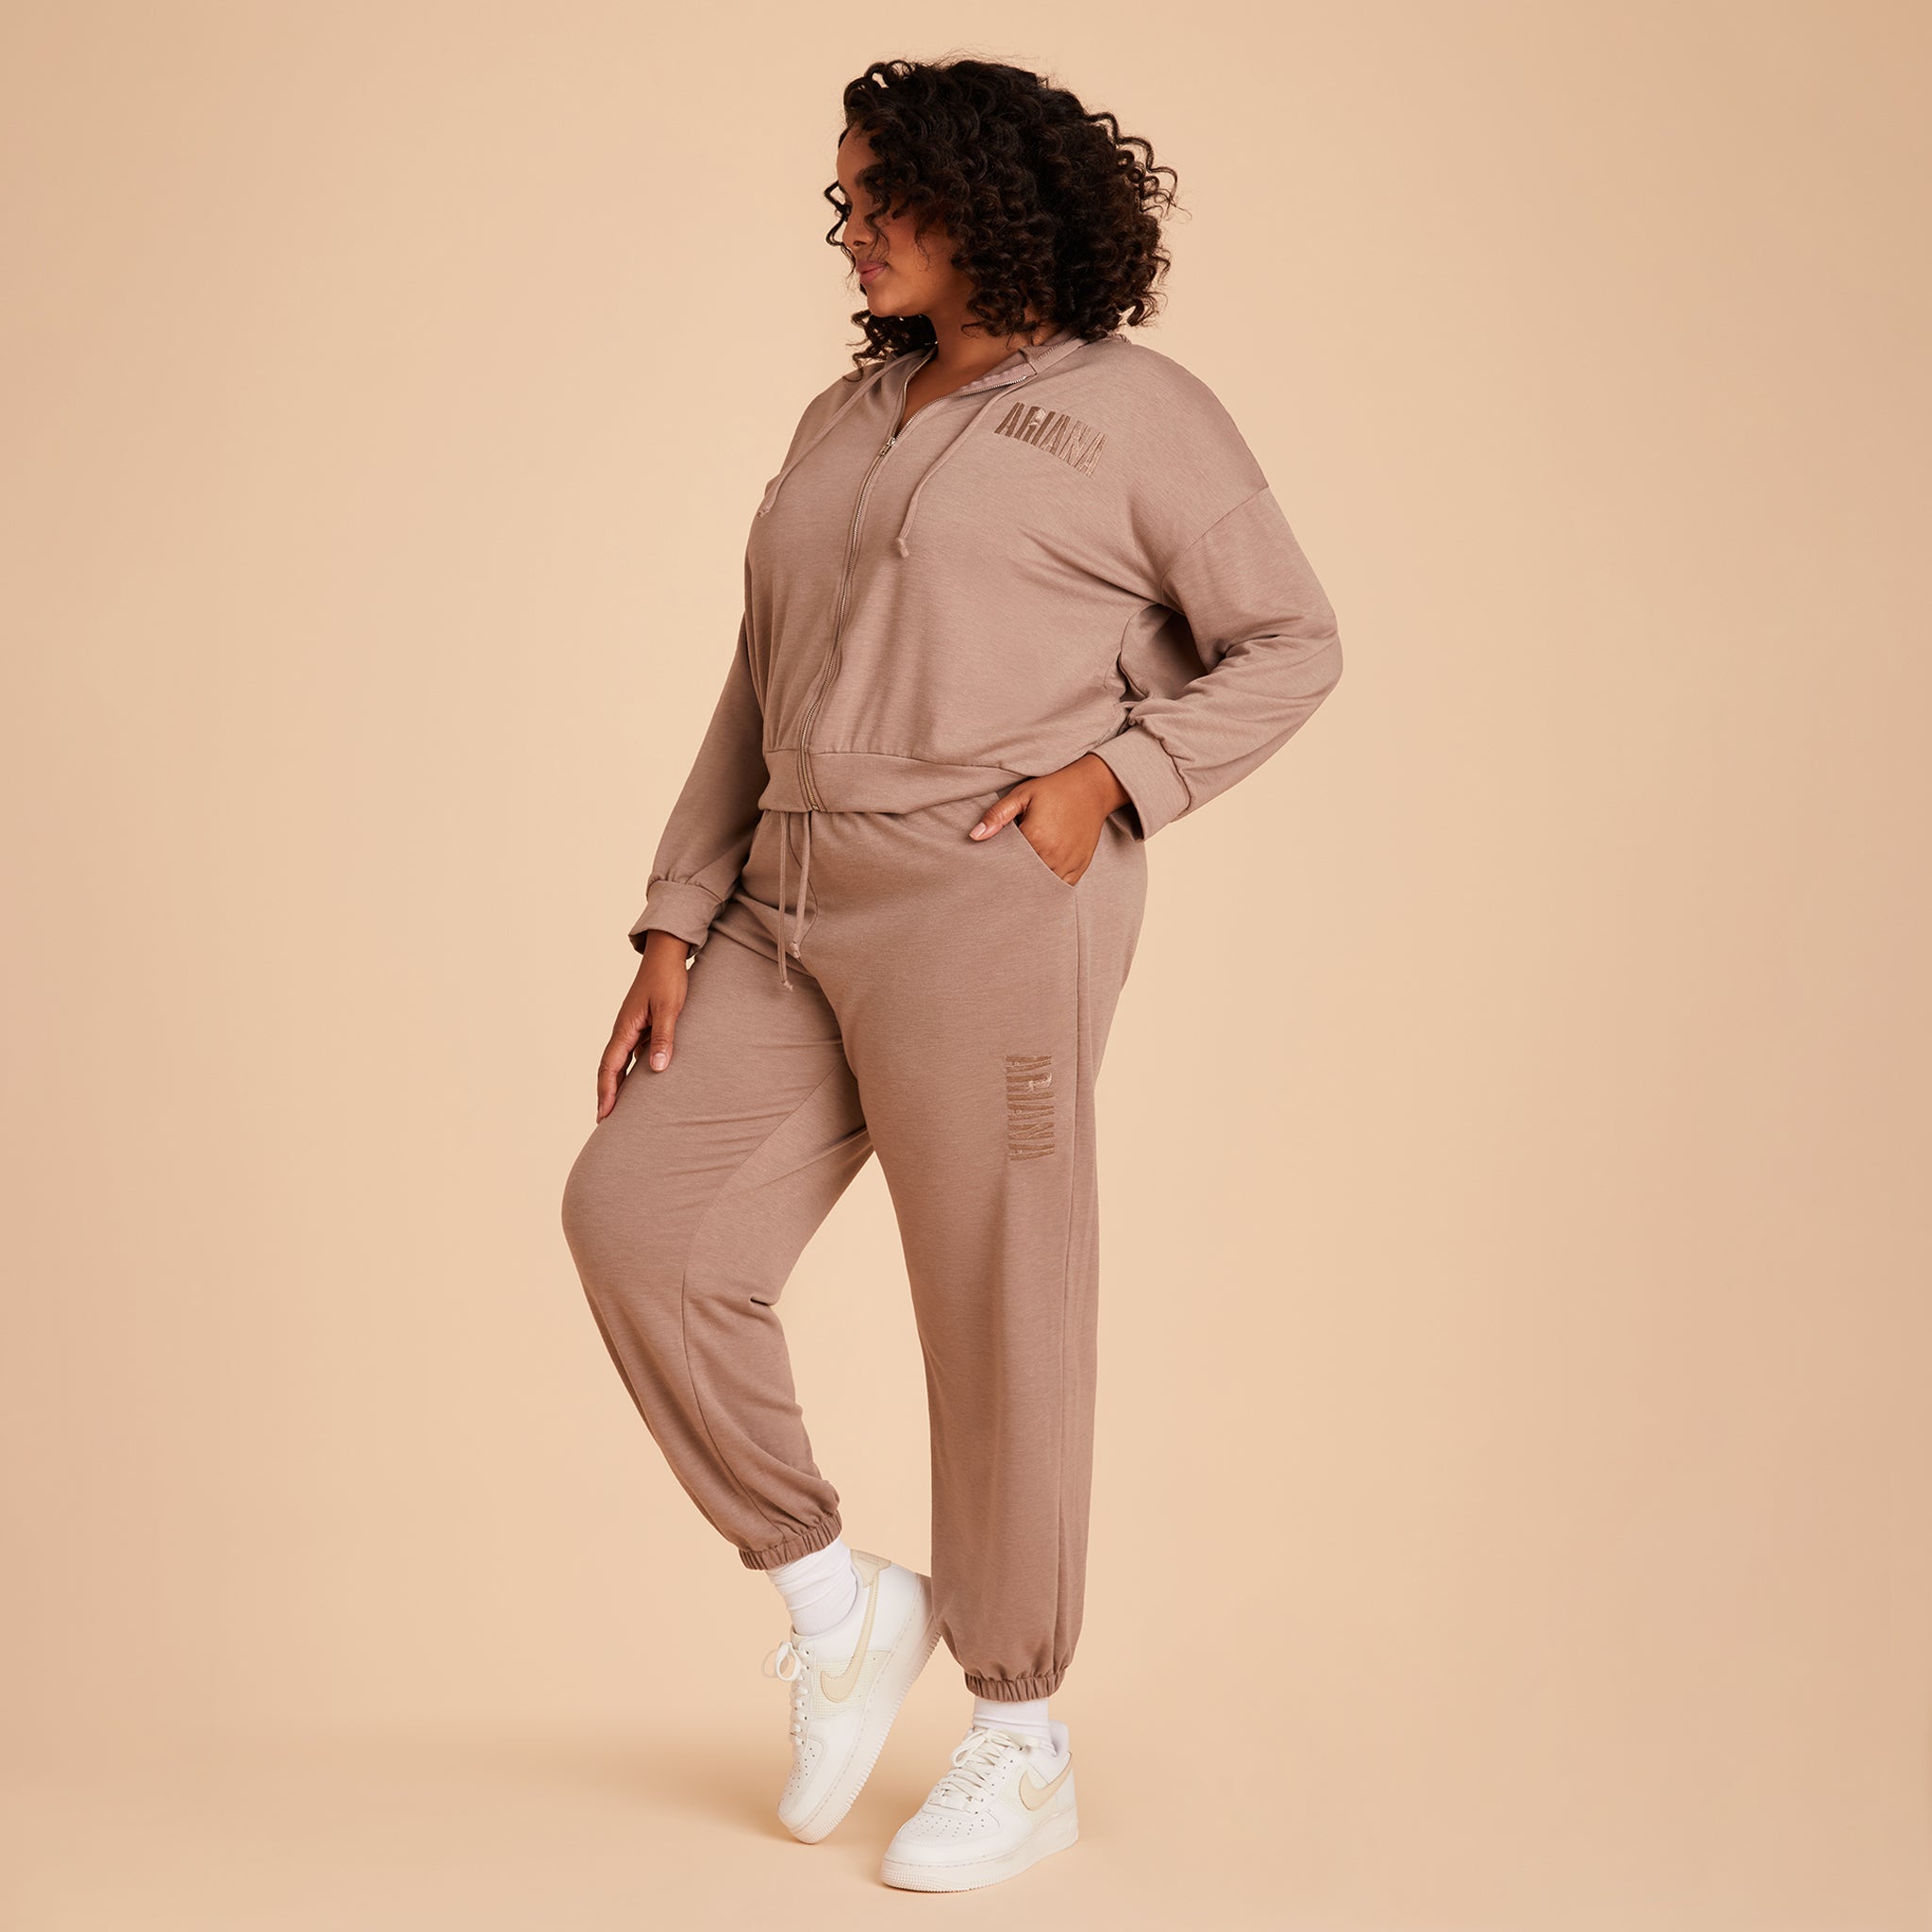 Plus Size Monogram sweatpants in cocoa front view